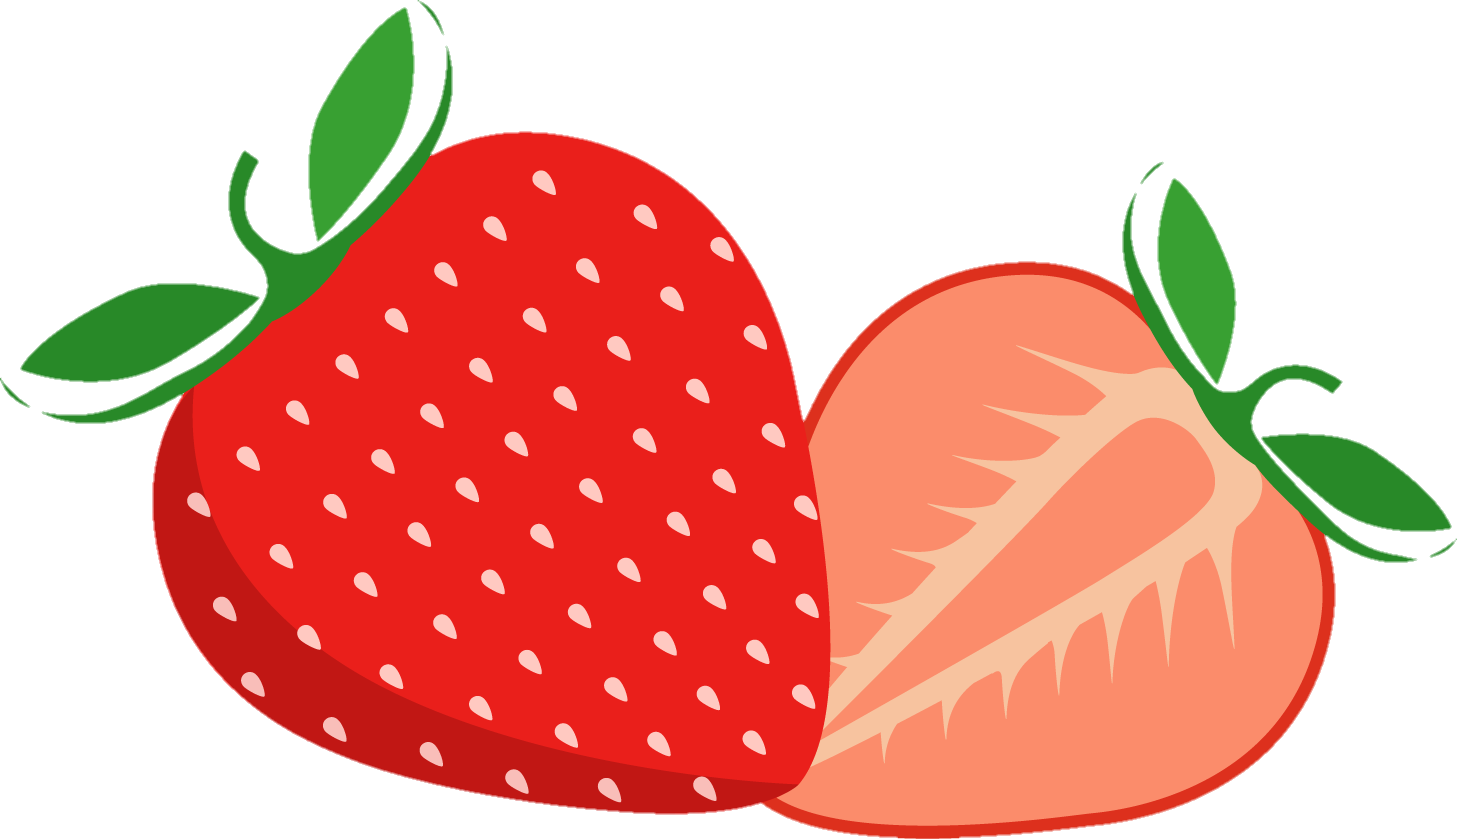 strawberry-png-image-from-pngfre-14